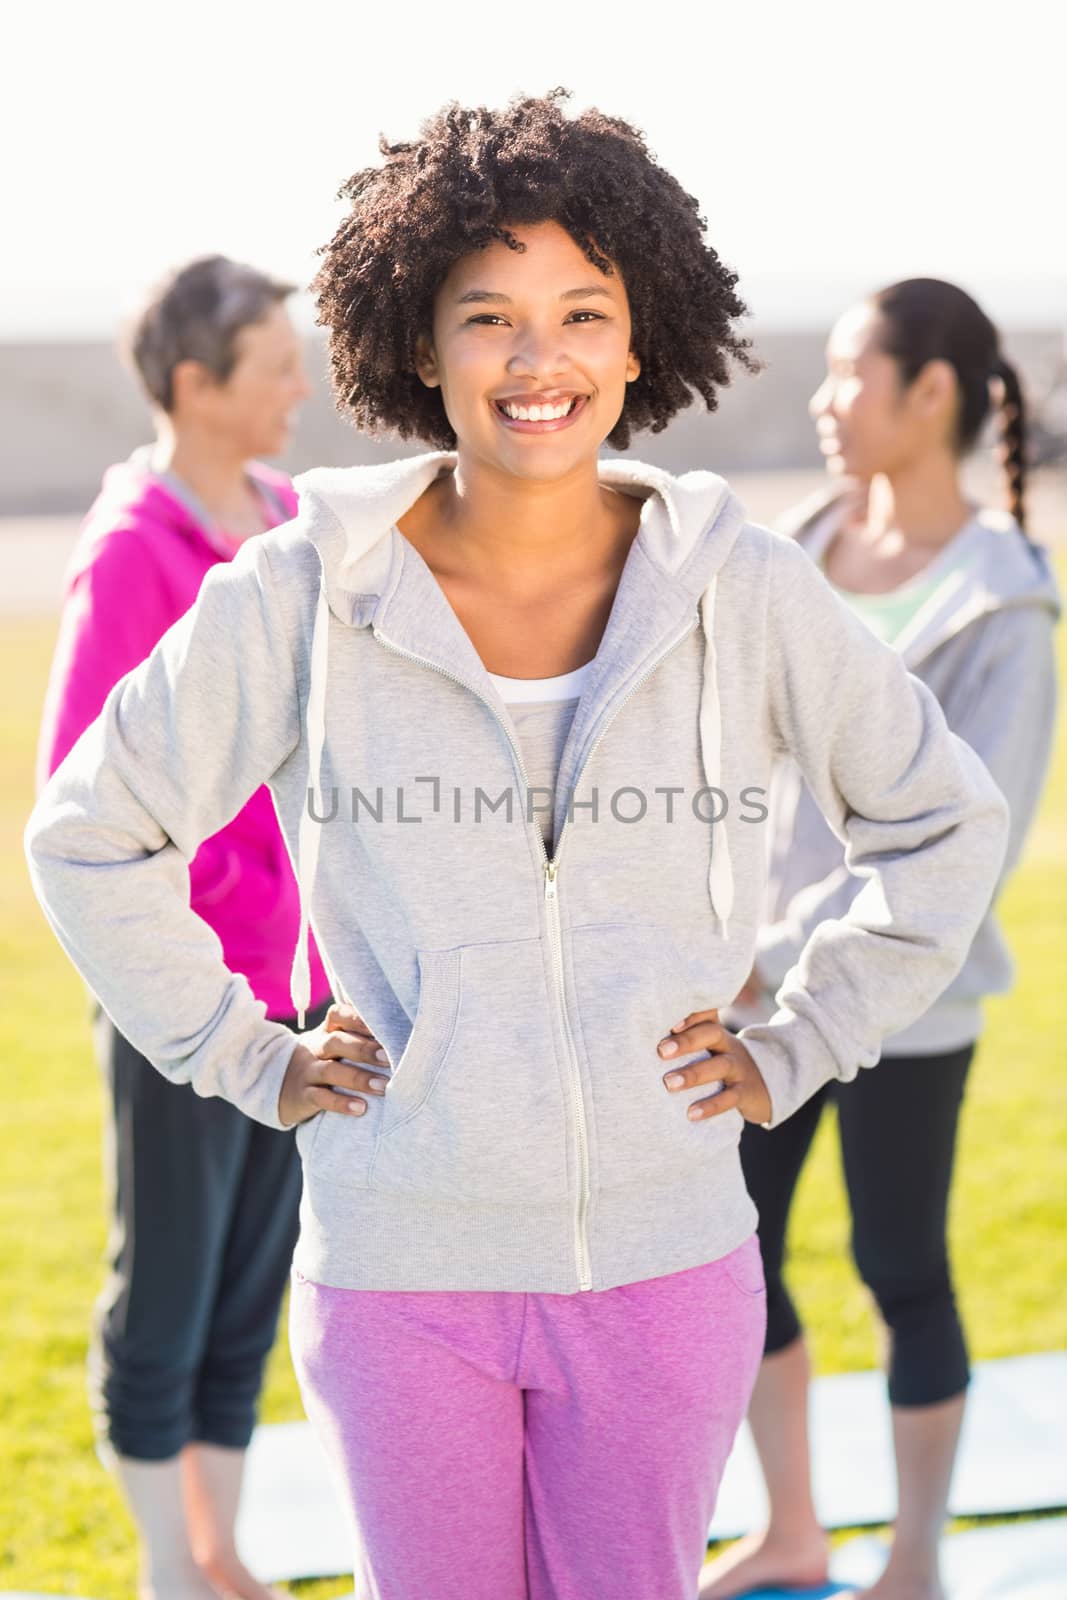 Portrait of sporty woman with hands on hips in front of friends in parkland